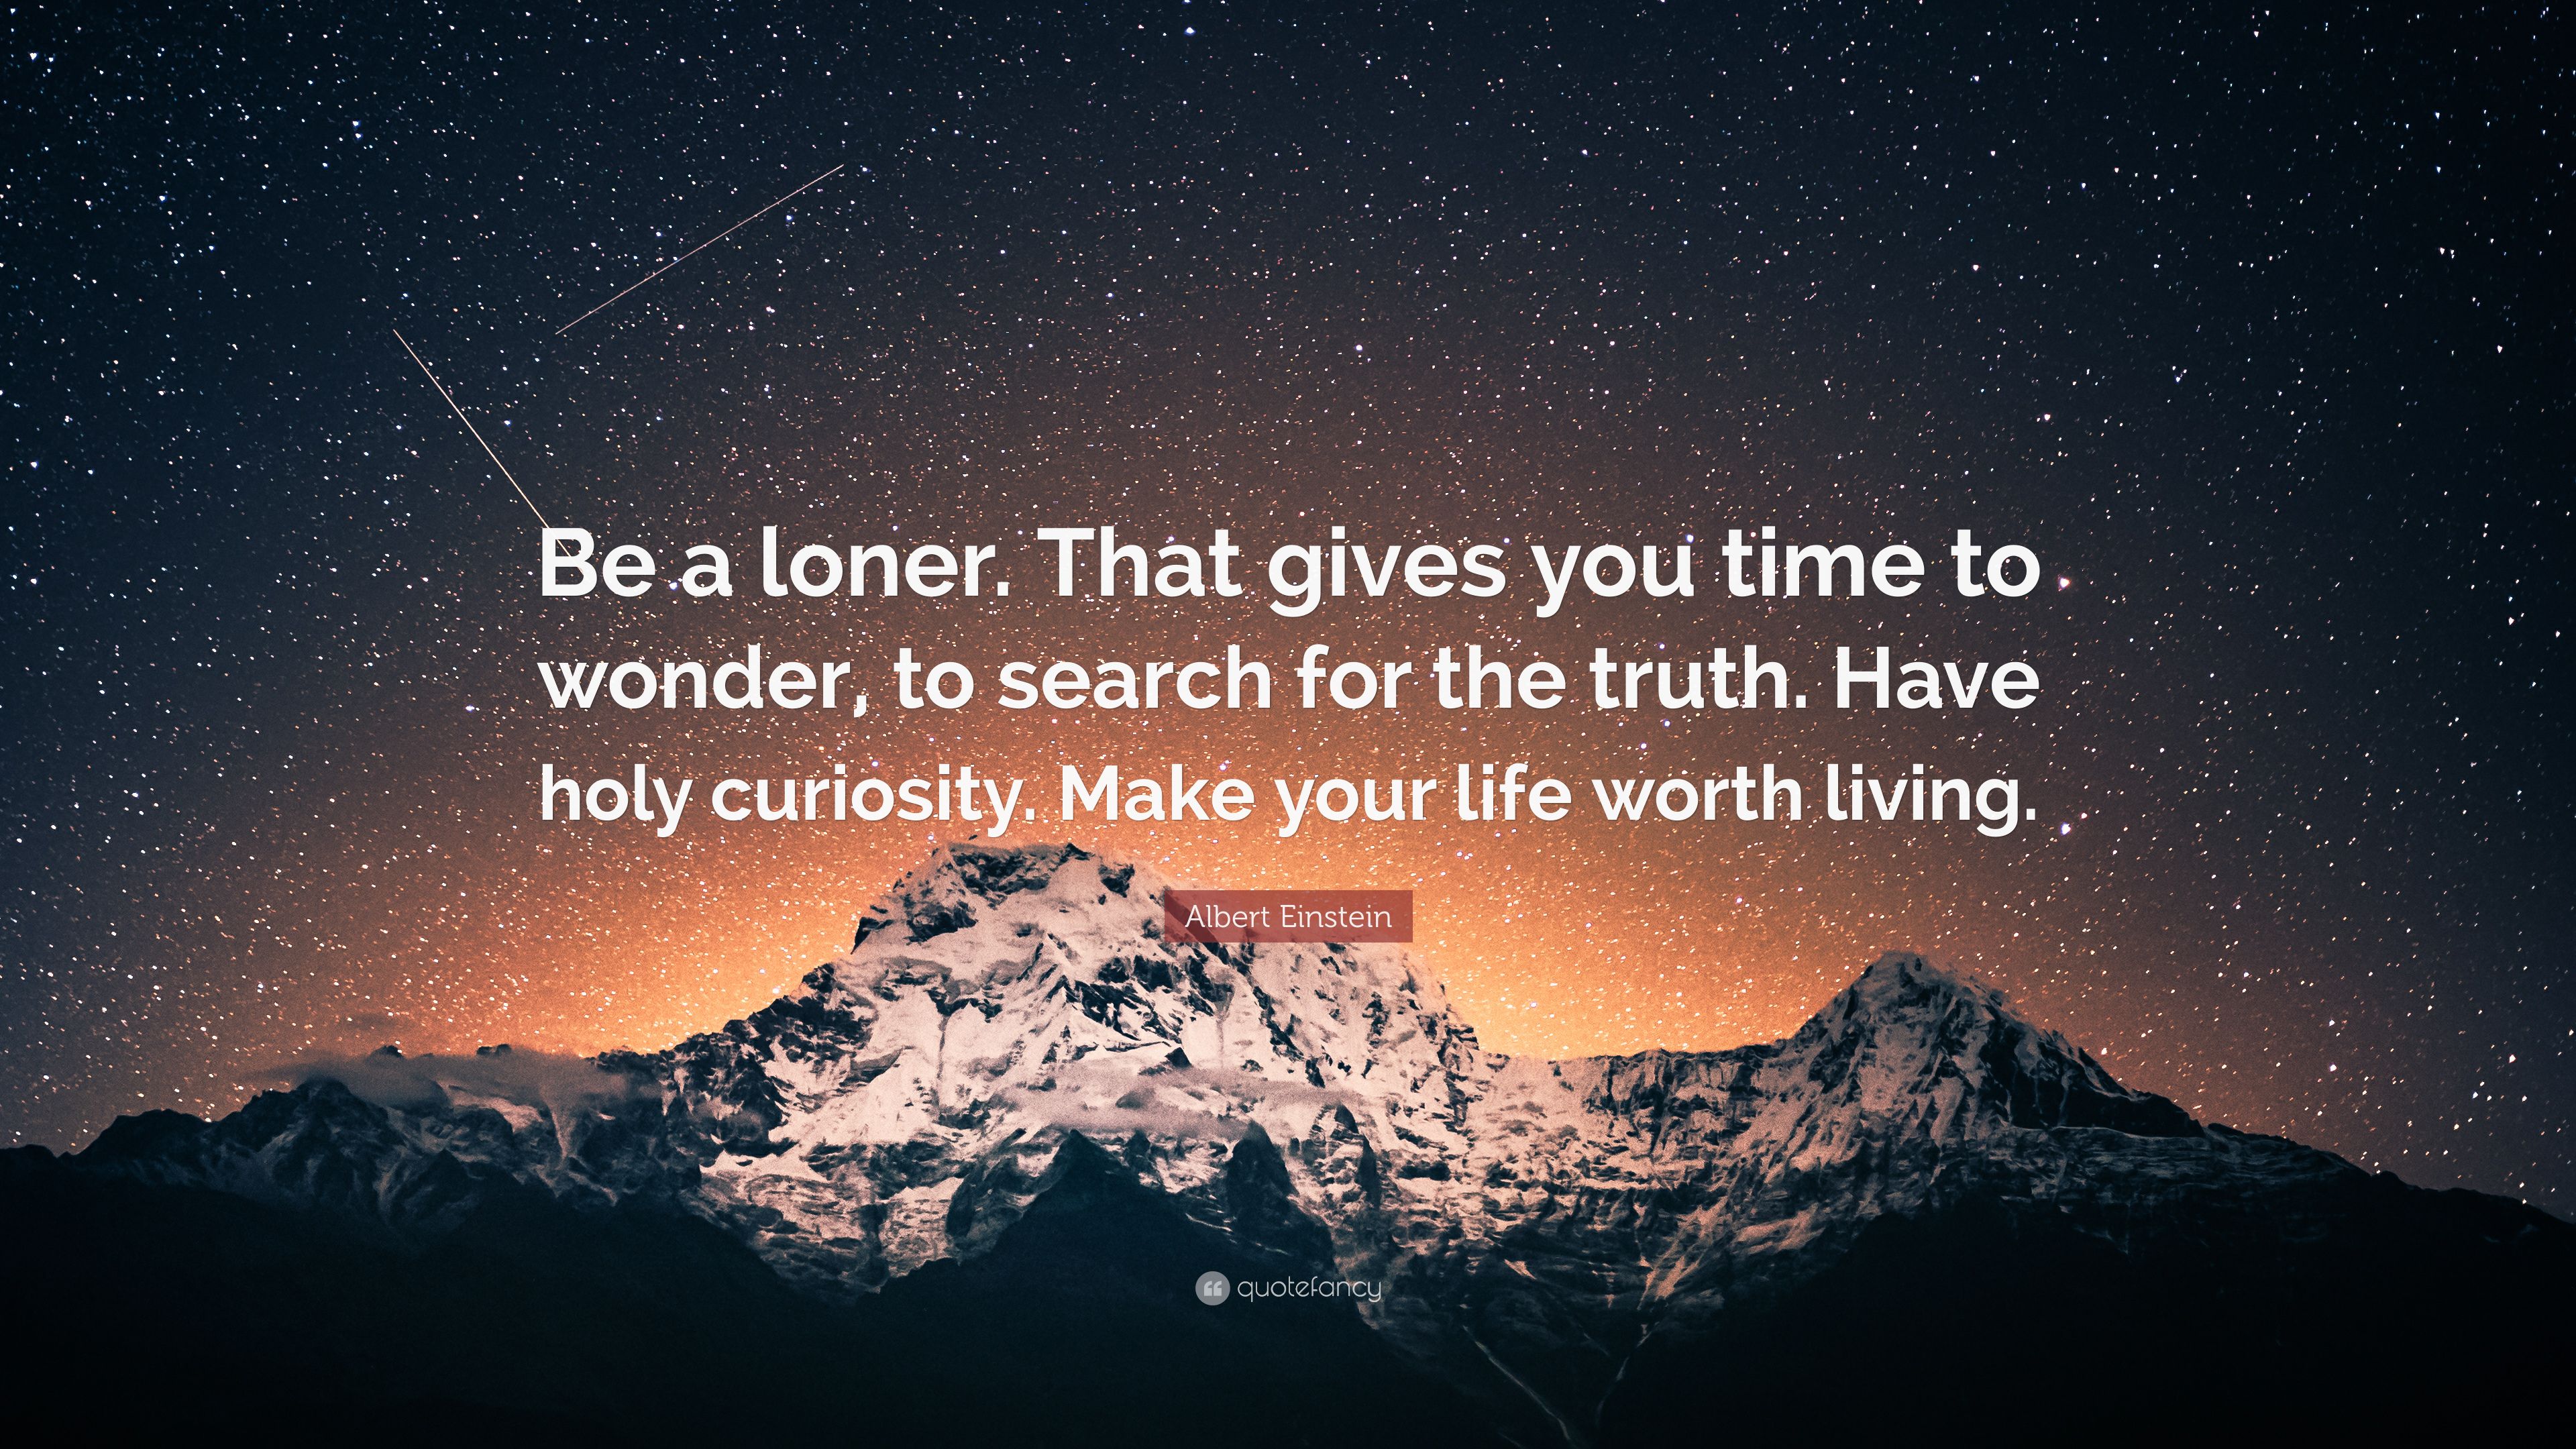 Albert Einstein Quote: “Be a loner. That gives you time to wonder